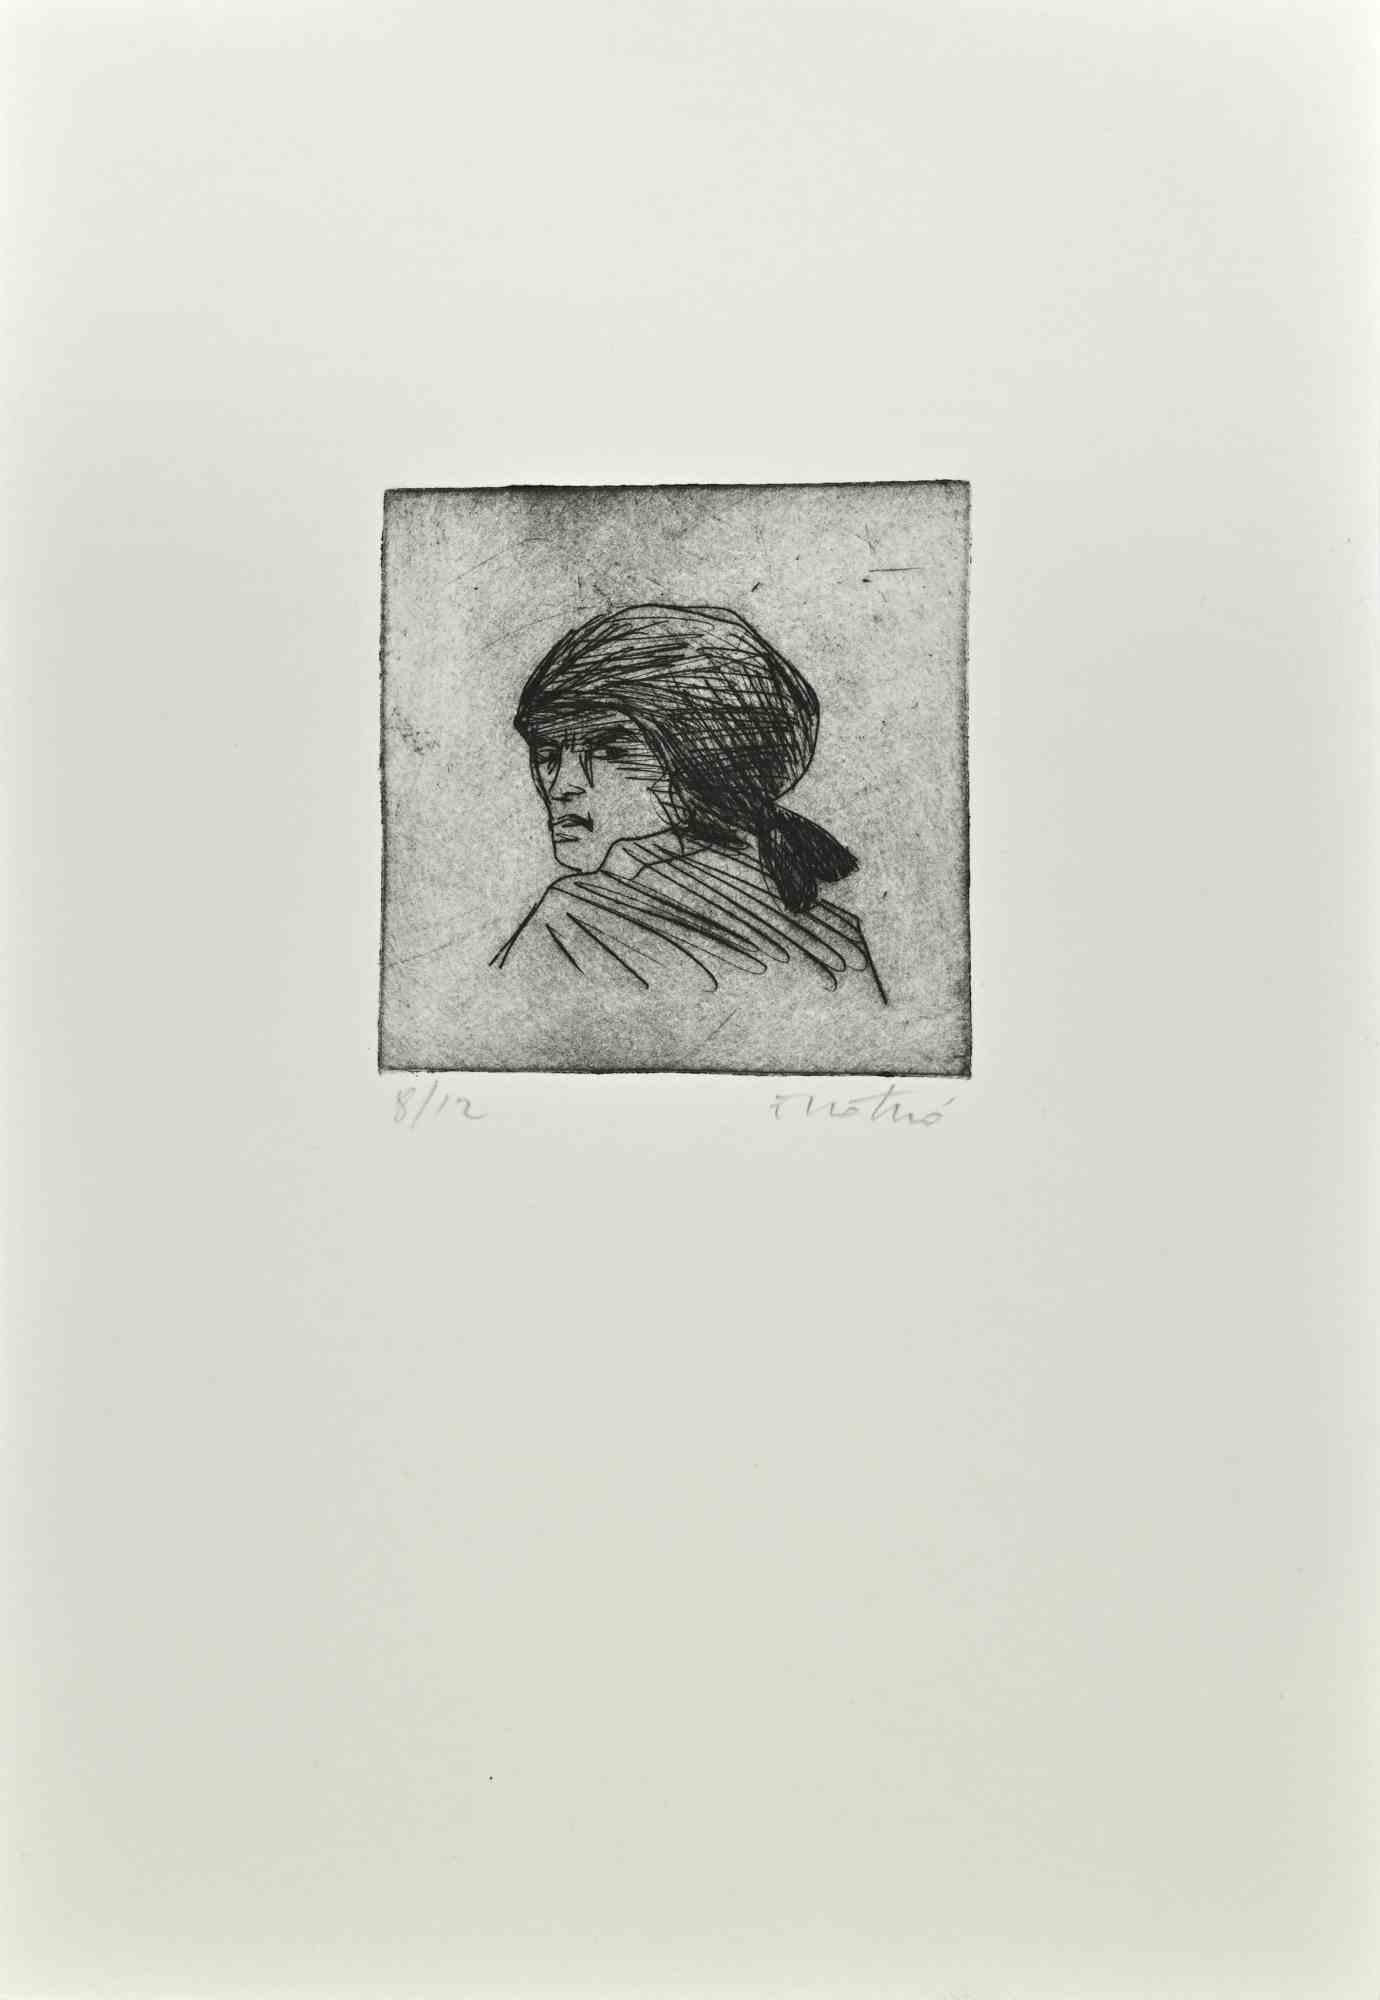 Woman of Calabria is an Etching realized by Enotrio Pugliese in 1963.

Limited edition of 12 copies numbered and signed by the artist.

Good condition on a white cardboard.

Enotrio Pugliese (May 11, 1920 - August 1989) was an Italian painter. Born